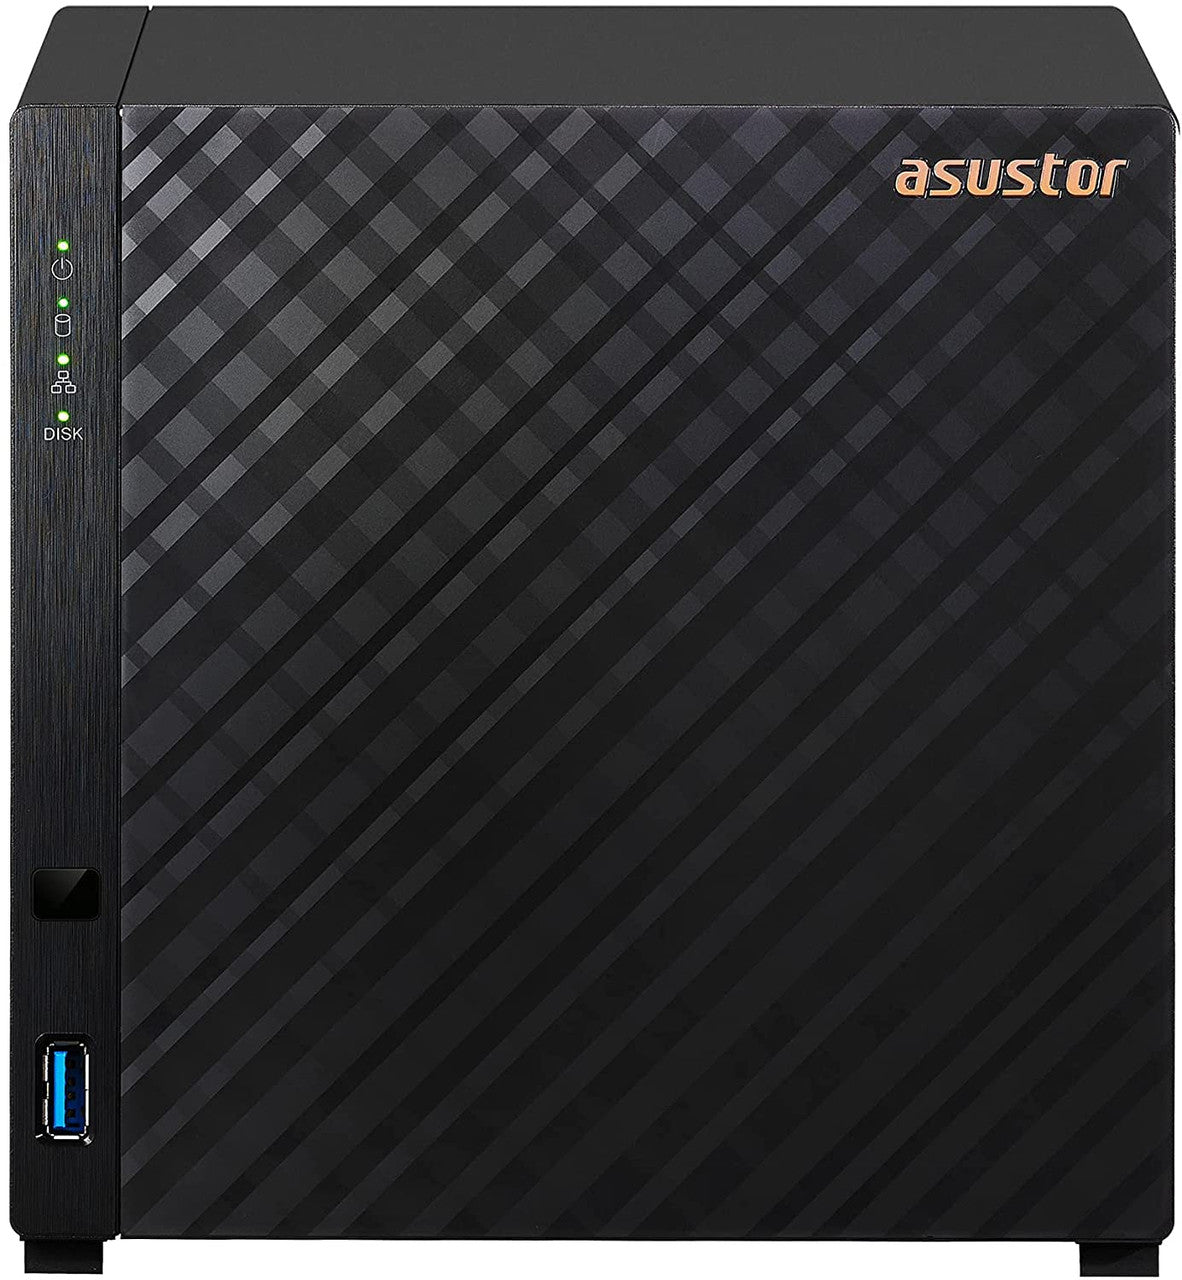 Asustor AS1104T 4-Bay Drivestor 4 NAS with 1GB RAM and 40TB (4x10TB) Western Digital RED Plus Drives